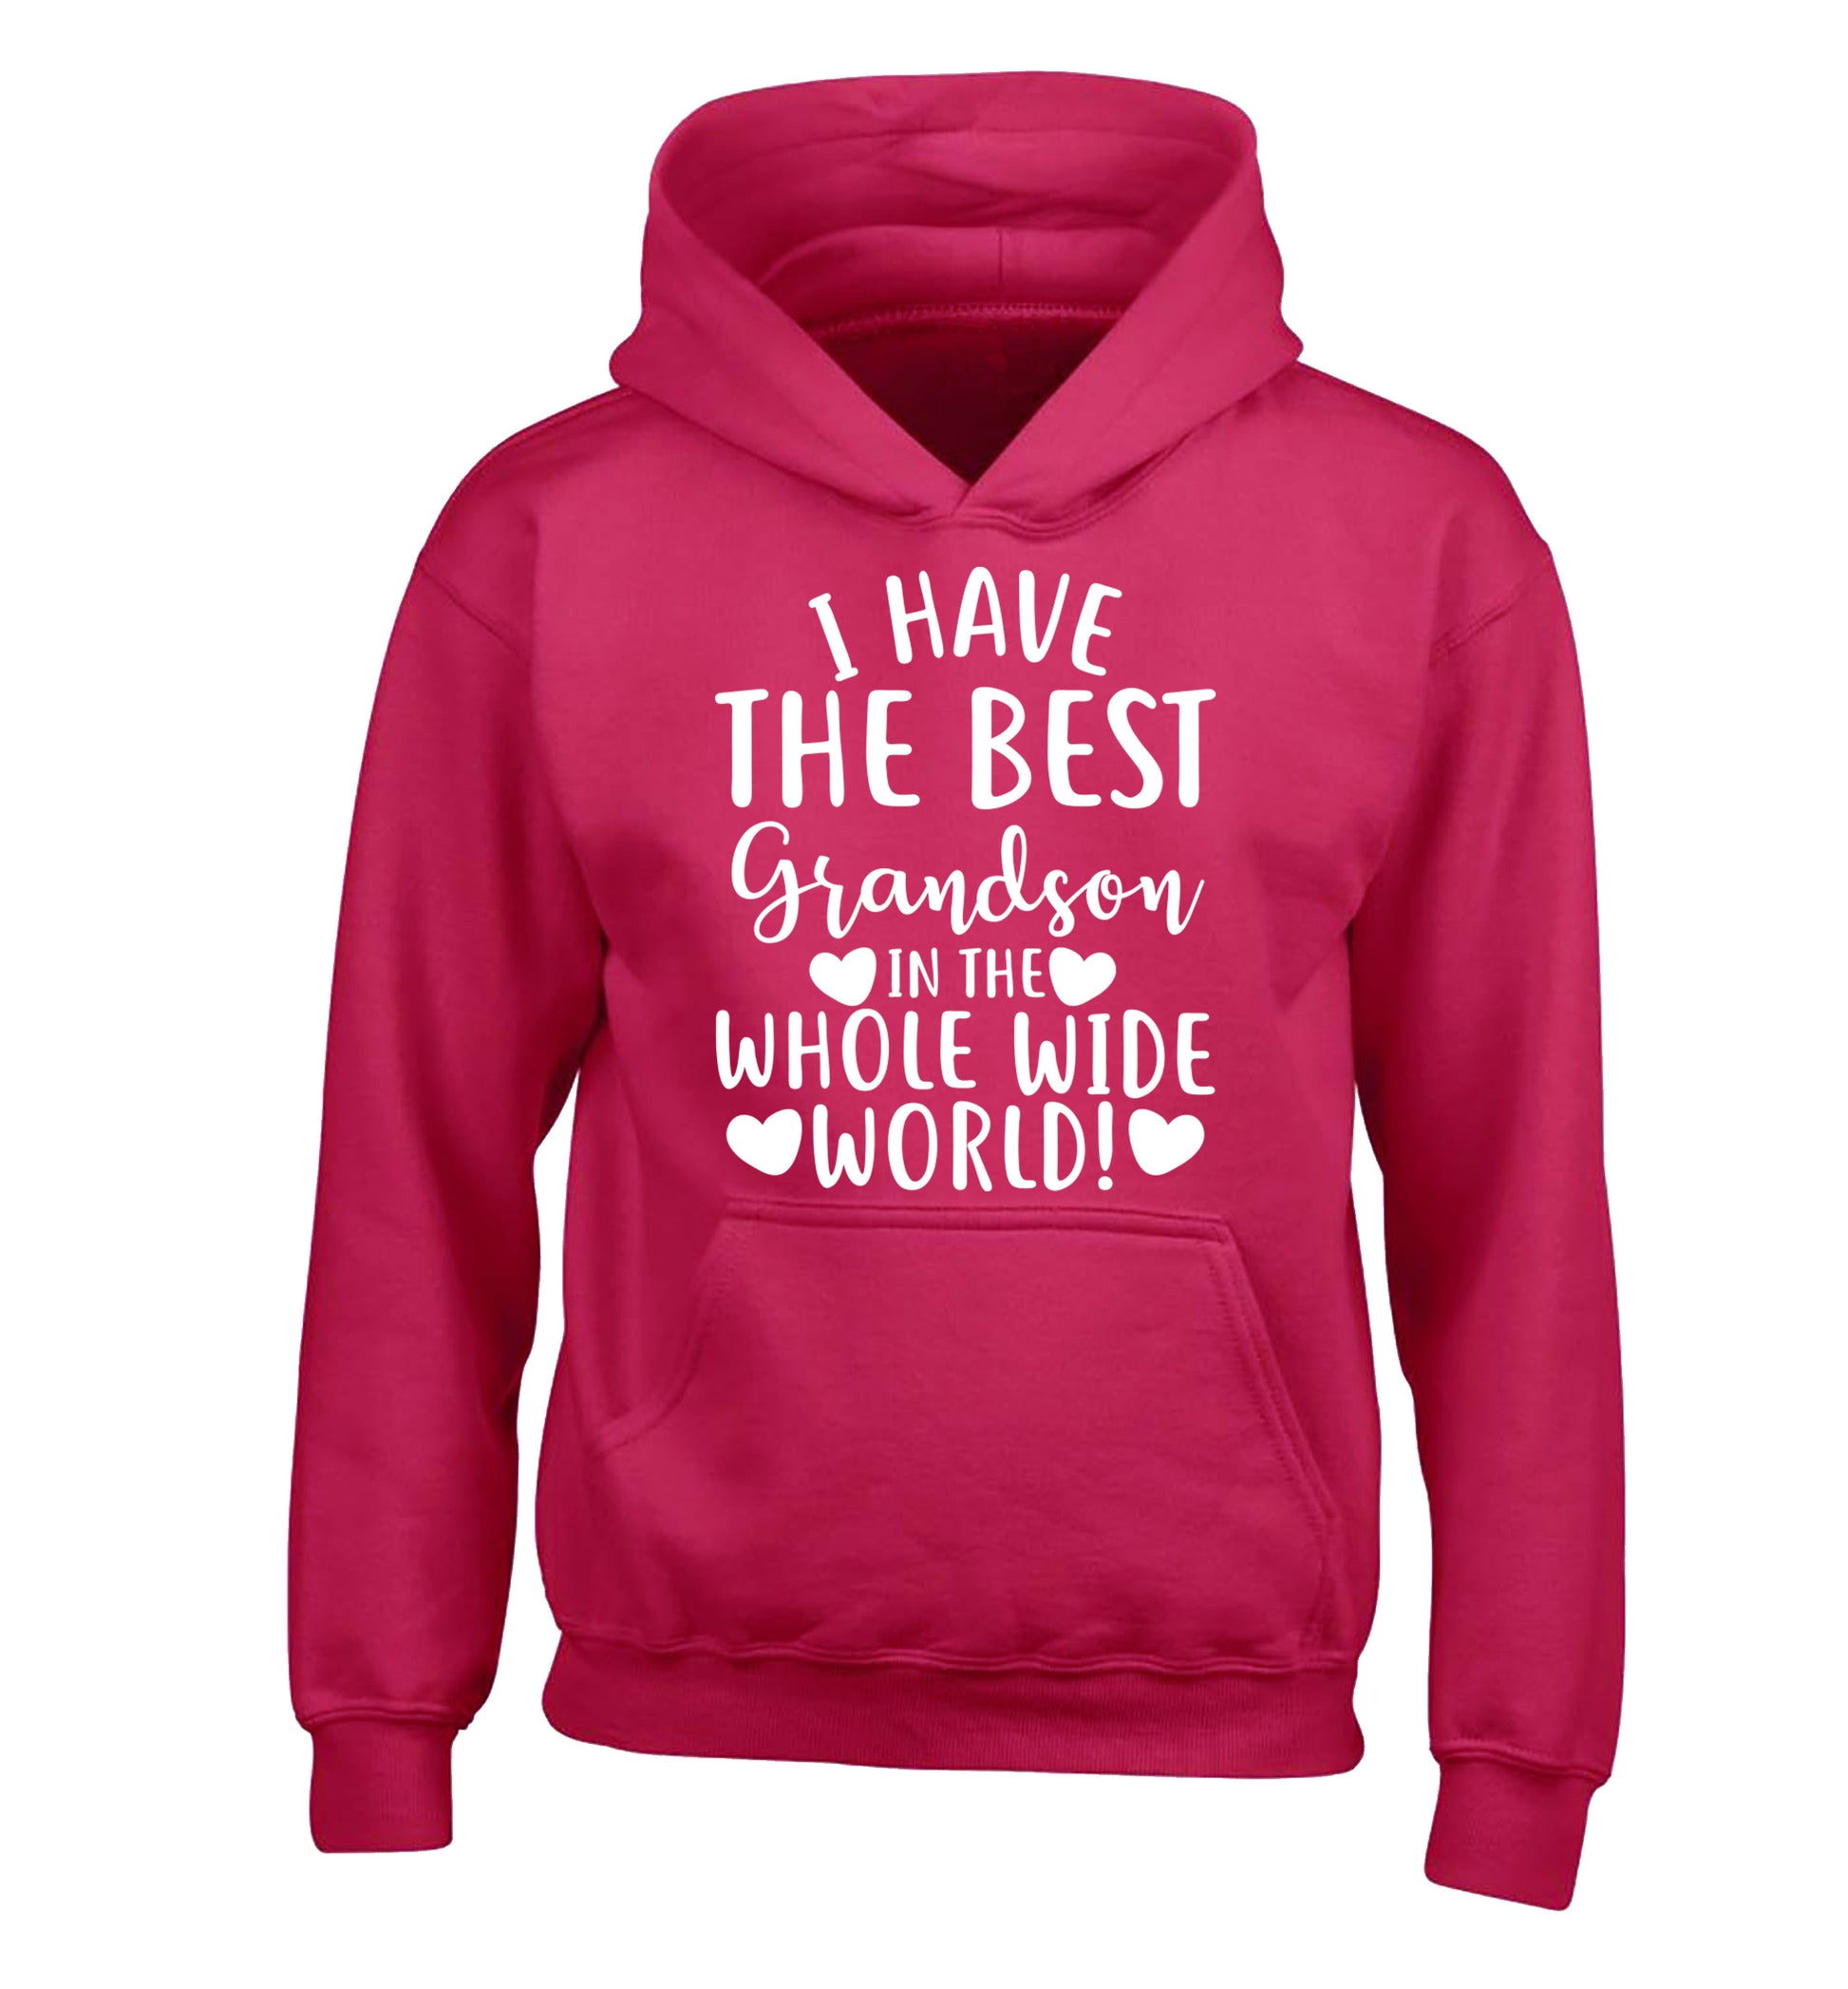 I have the best grandson in the whole wide world! children's pink hoodie 12-13 Years